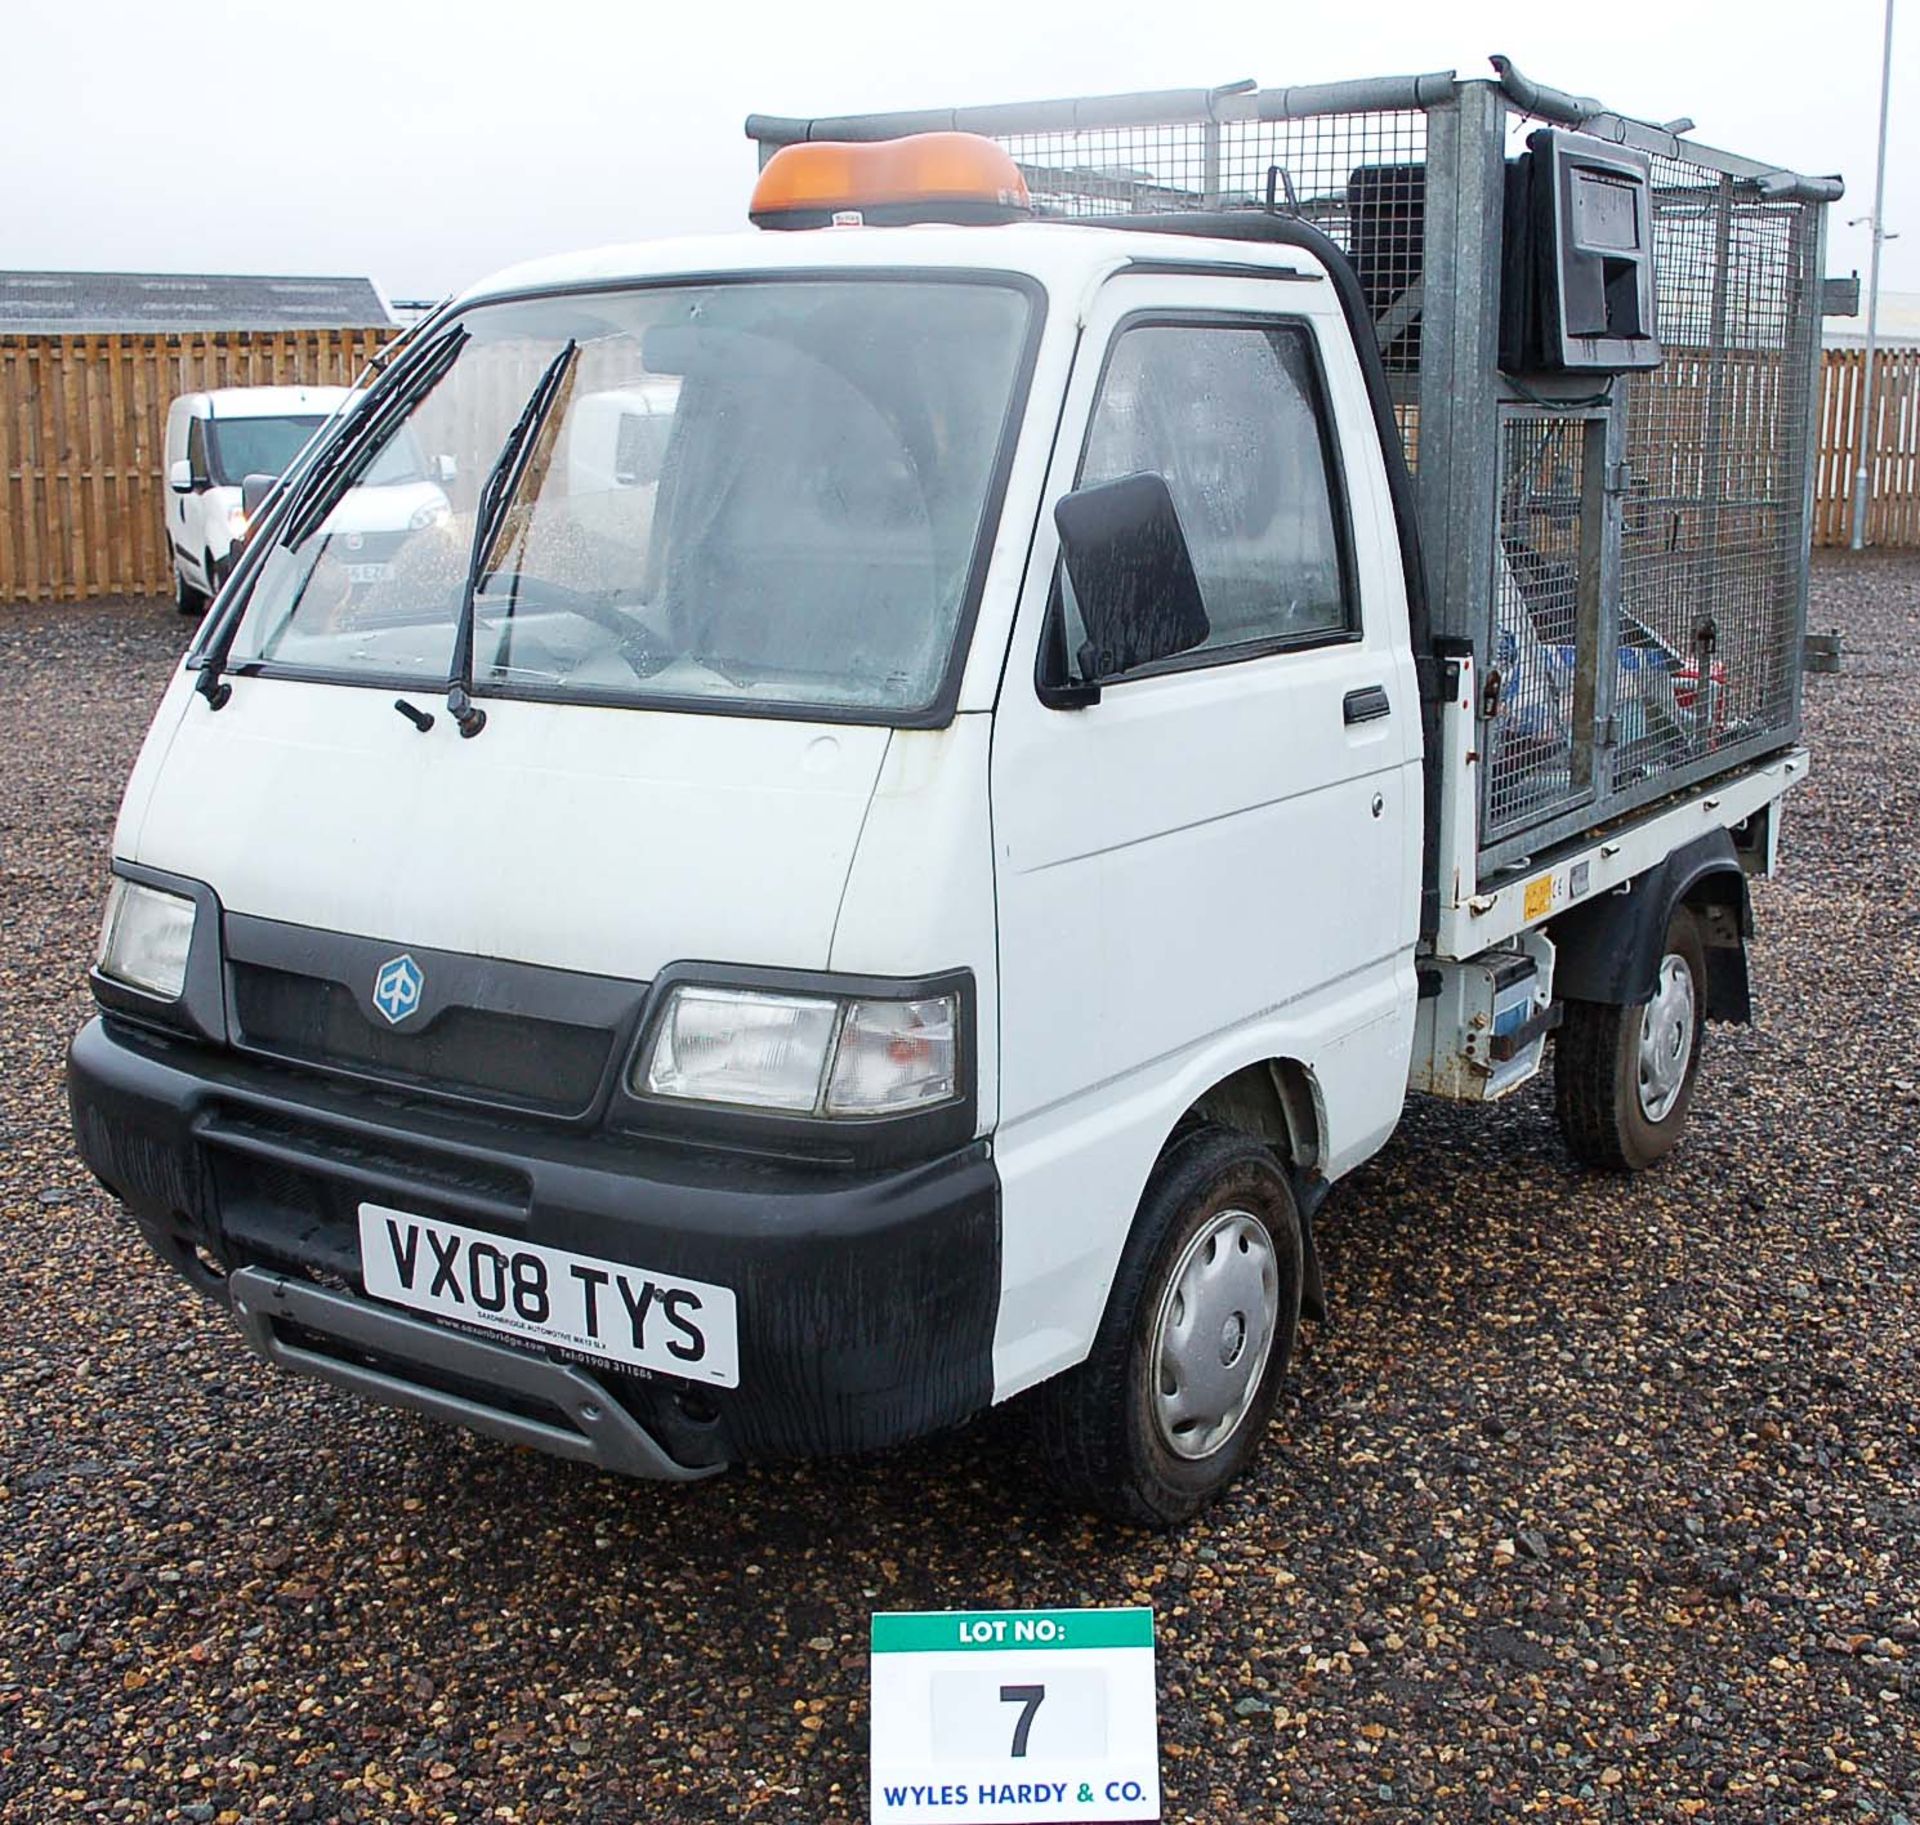 A PIAGGIO PORTER 1.3 Petrol 4WD Cage Bodied Tipper Truck. Registration Number: VX08 TYS. 5-Speed - Image 2 of 7